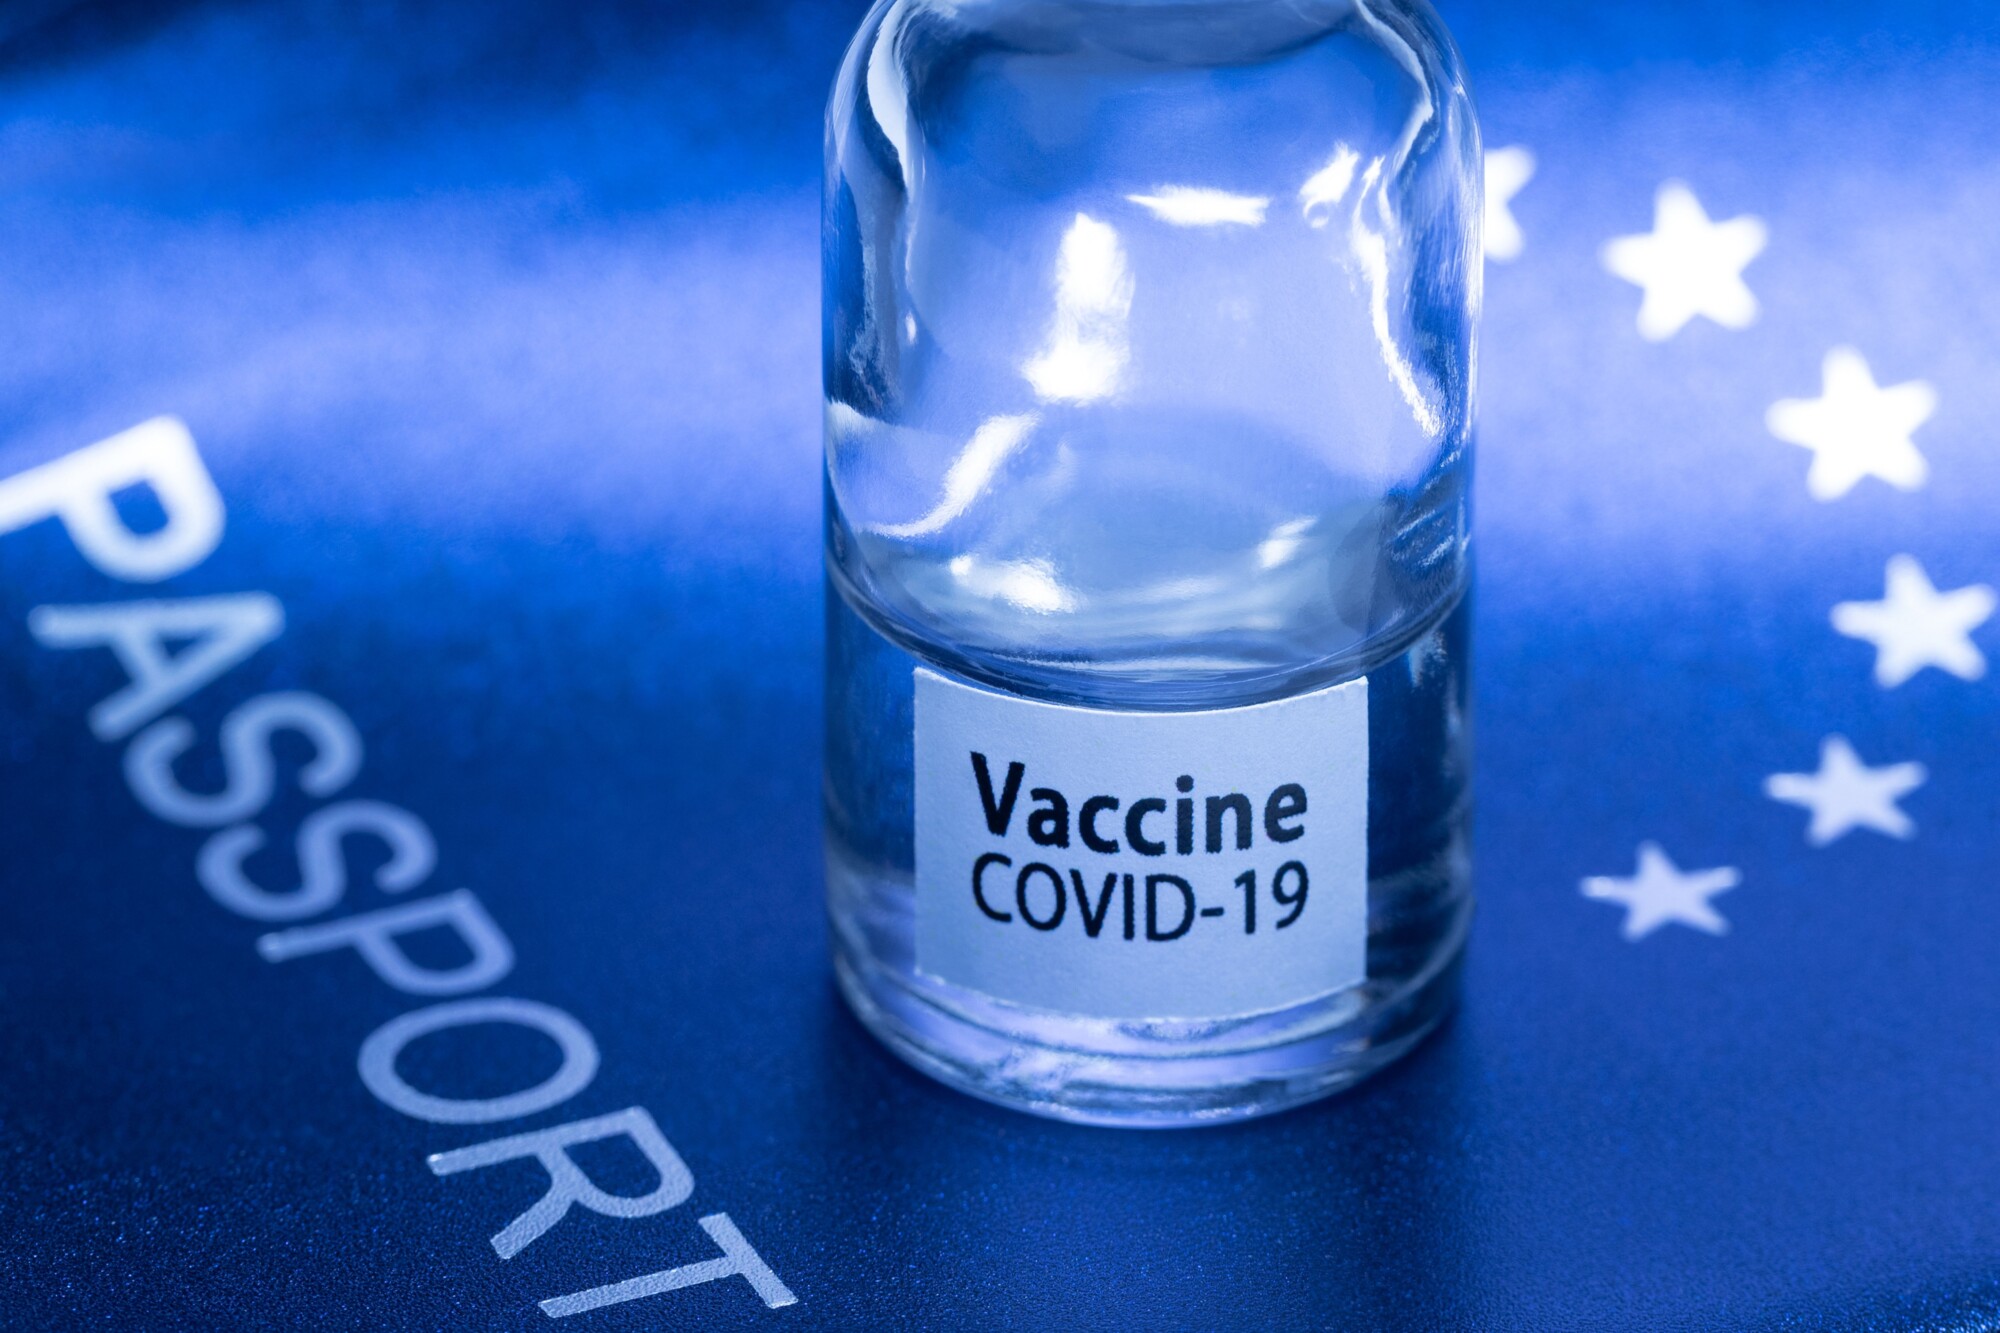 Scammers Could Forge Vaccine Passports